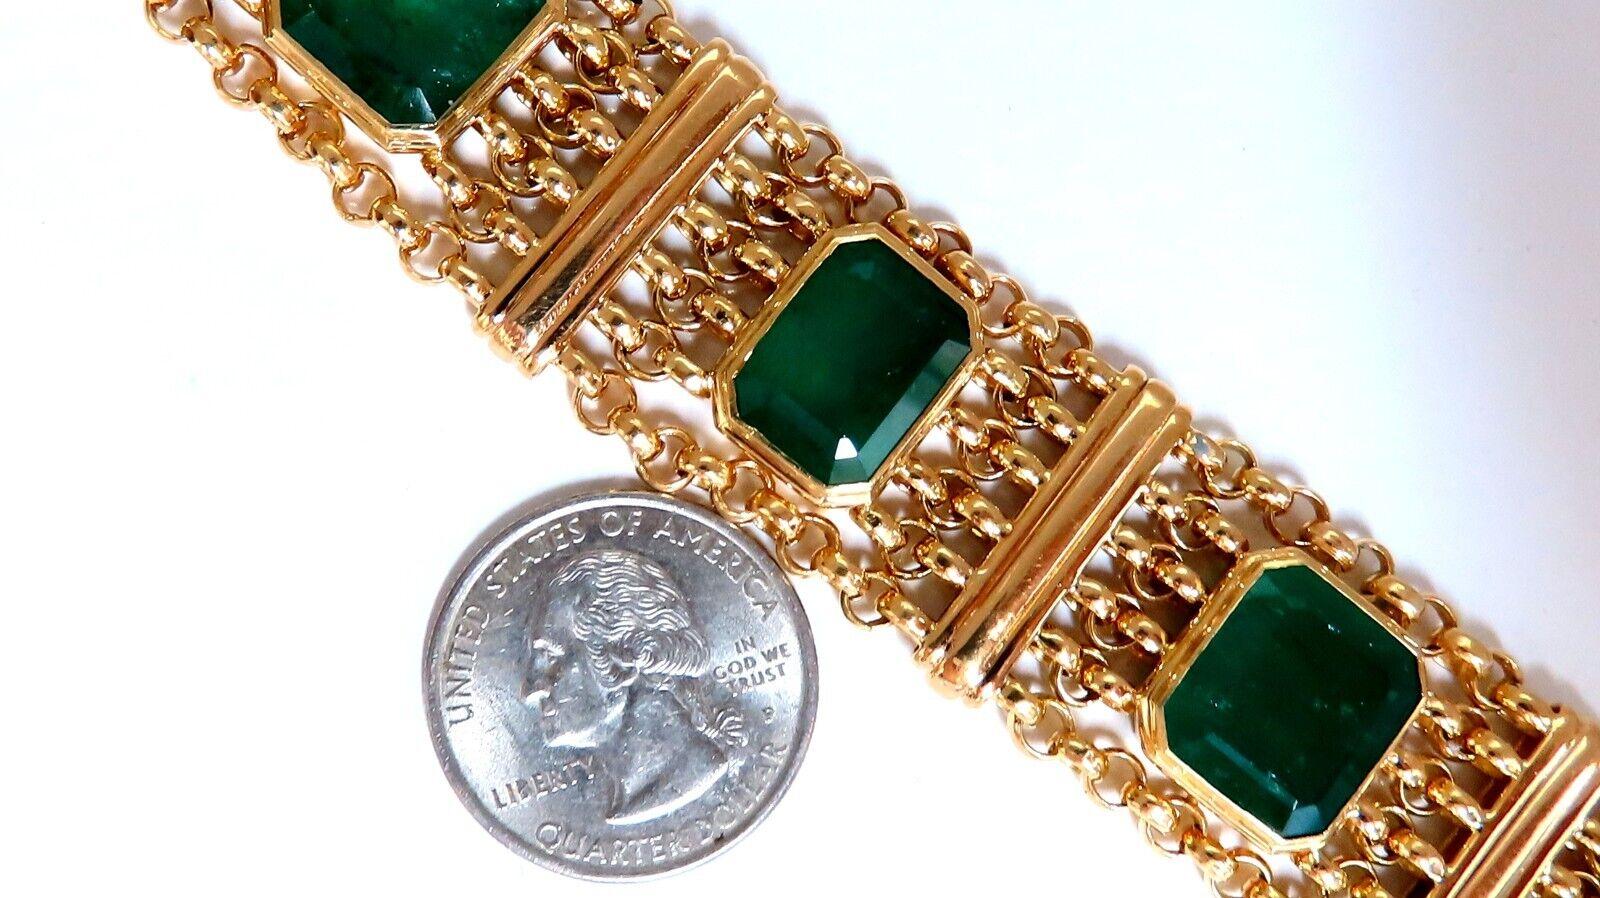 Natural Emeralds Vintage Bracelet

60ct. Natural emeralds

One random tested by GIA

F2 Clarity 

Emerald, full cuts

Semi Transparent & Vivid Greens.

 average: 14 X 12mm

5 count.

18kt. yellow gold 

70 Grams.

Bracelet measures  23mm wide

7